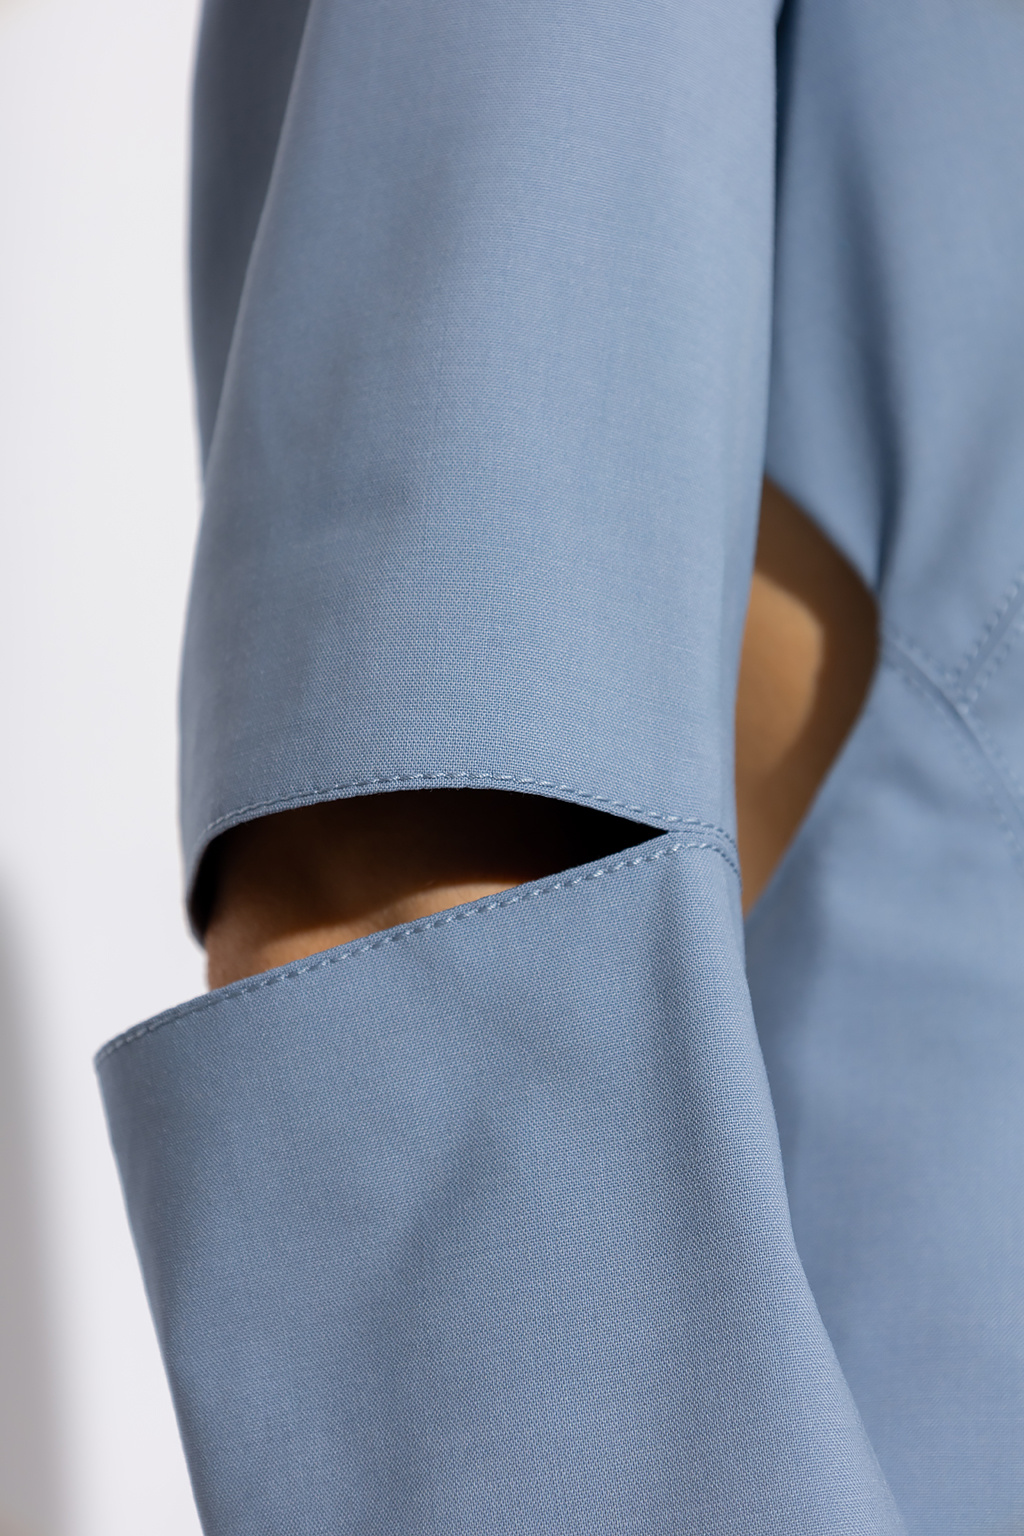 Jacquemus 'breathes new life into the staple suit jacket